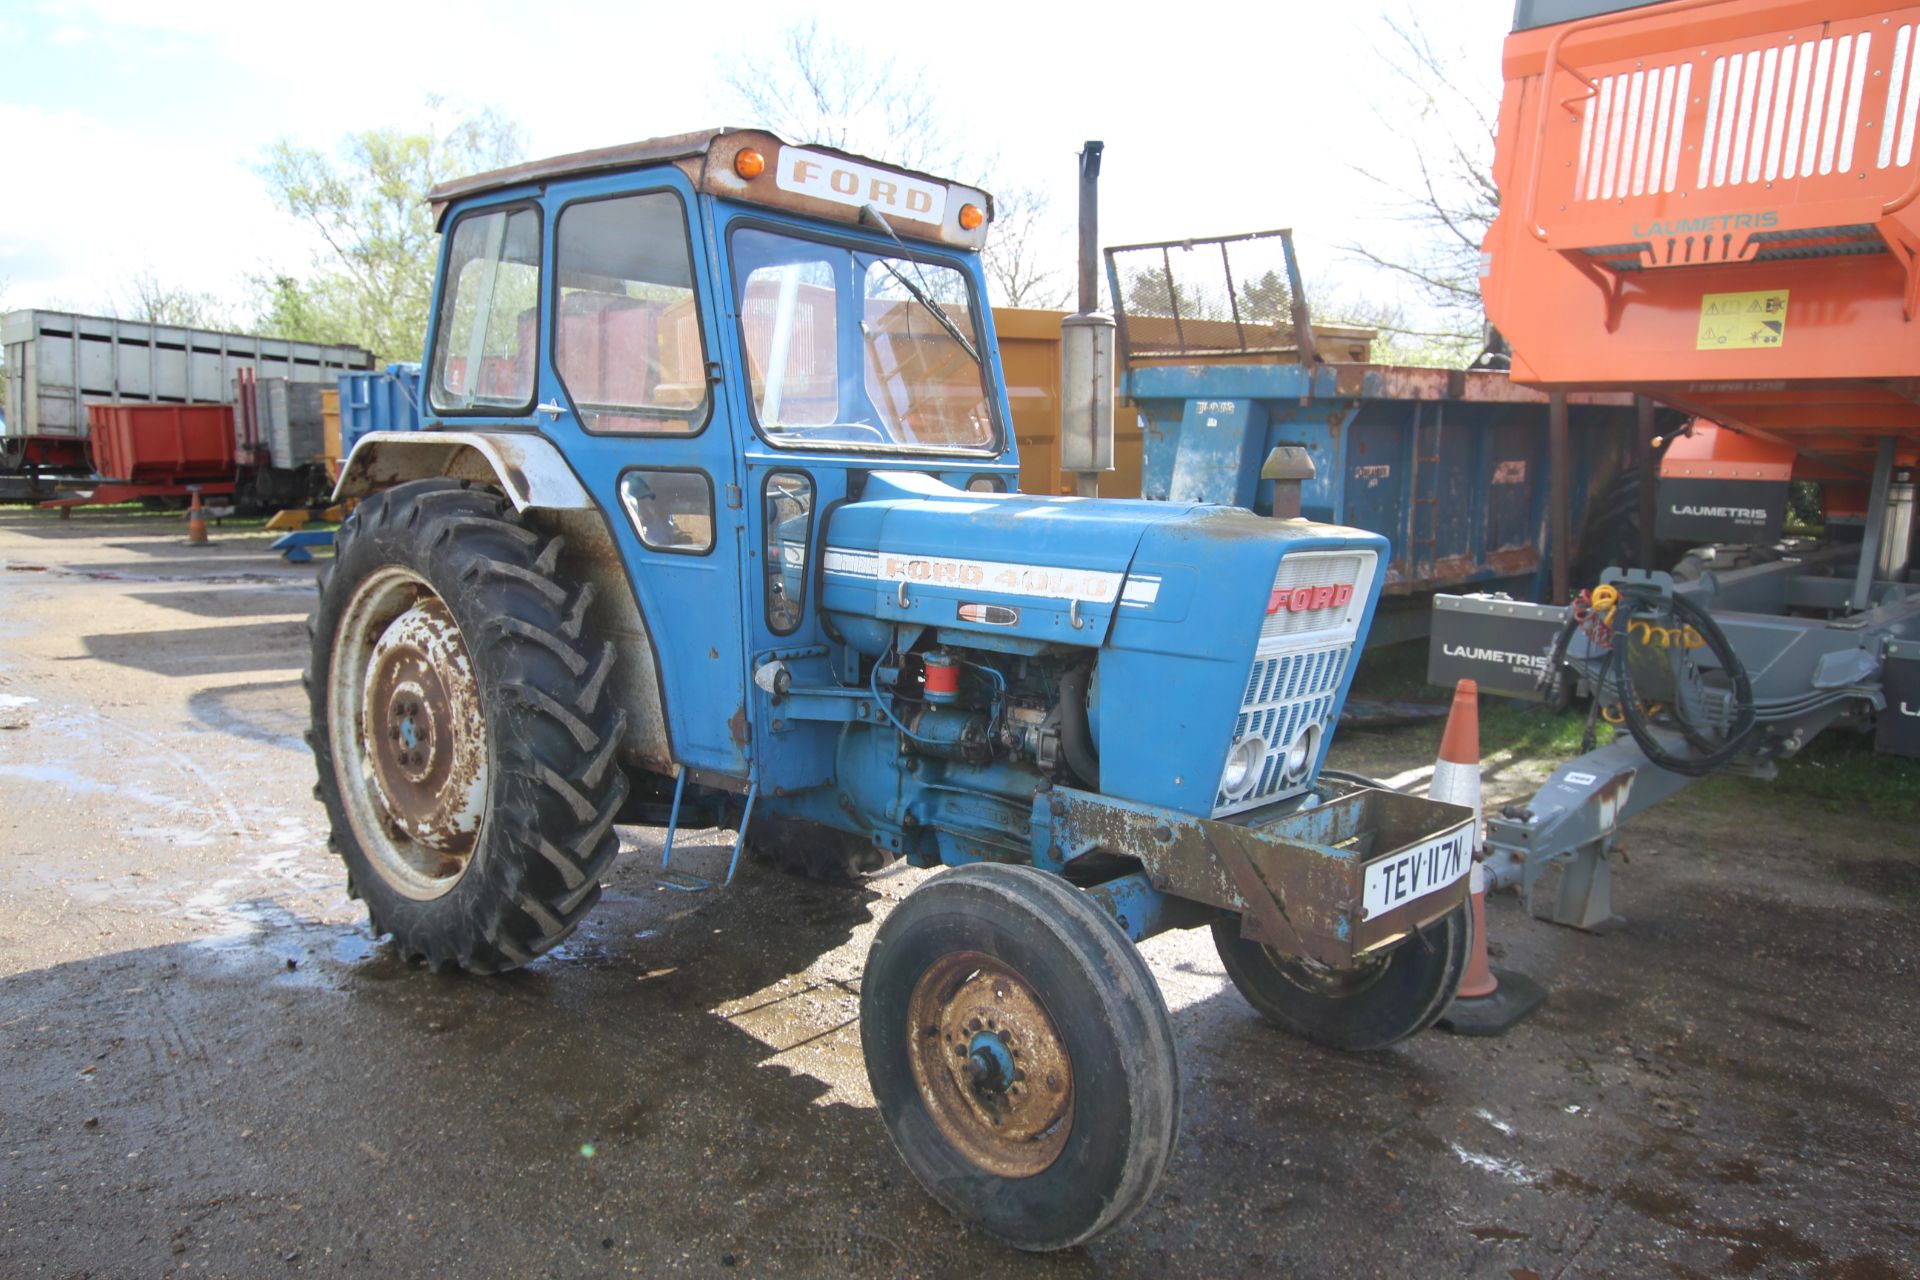 Ford 4000 2WD tractor. Registration TEV 117N. Date of first registration 01/08/1974. 6,619 hours.